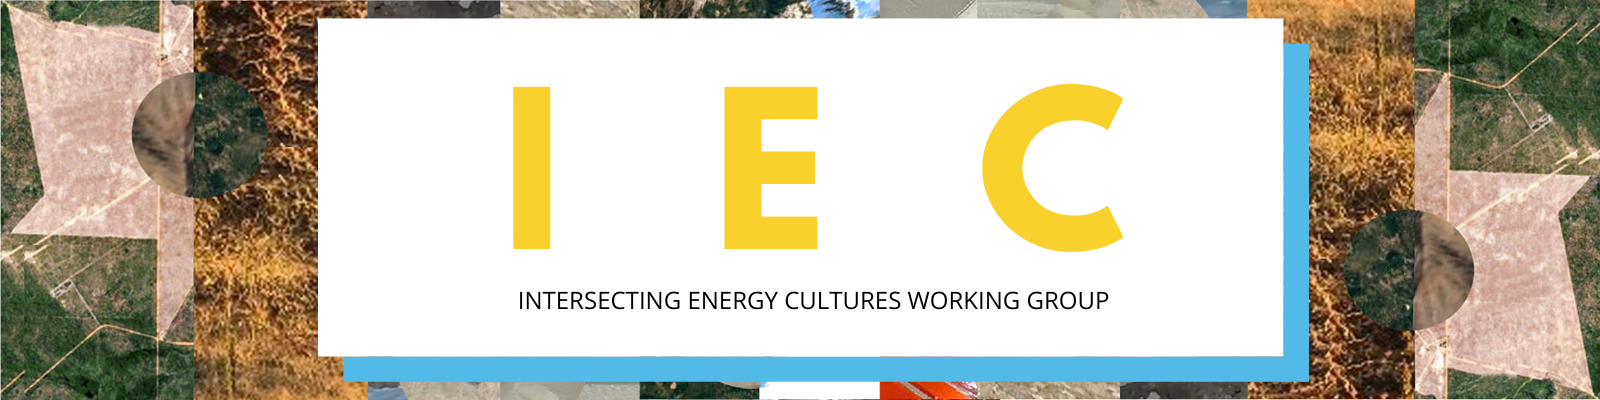 International Energy Cultures Working Group banner with text in yellow, black, and blue